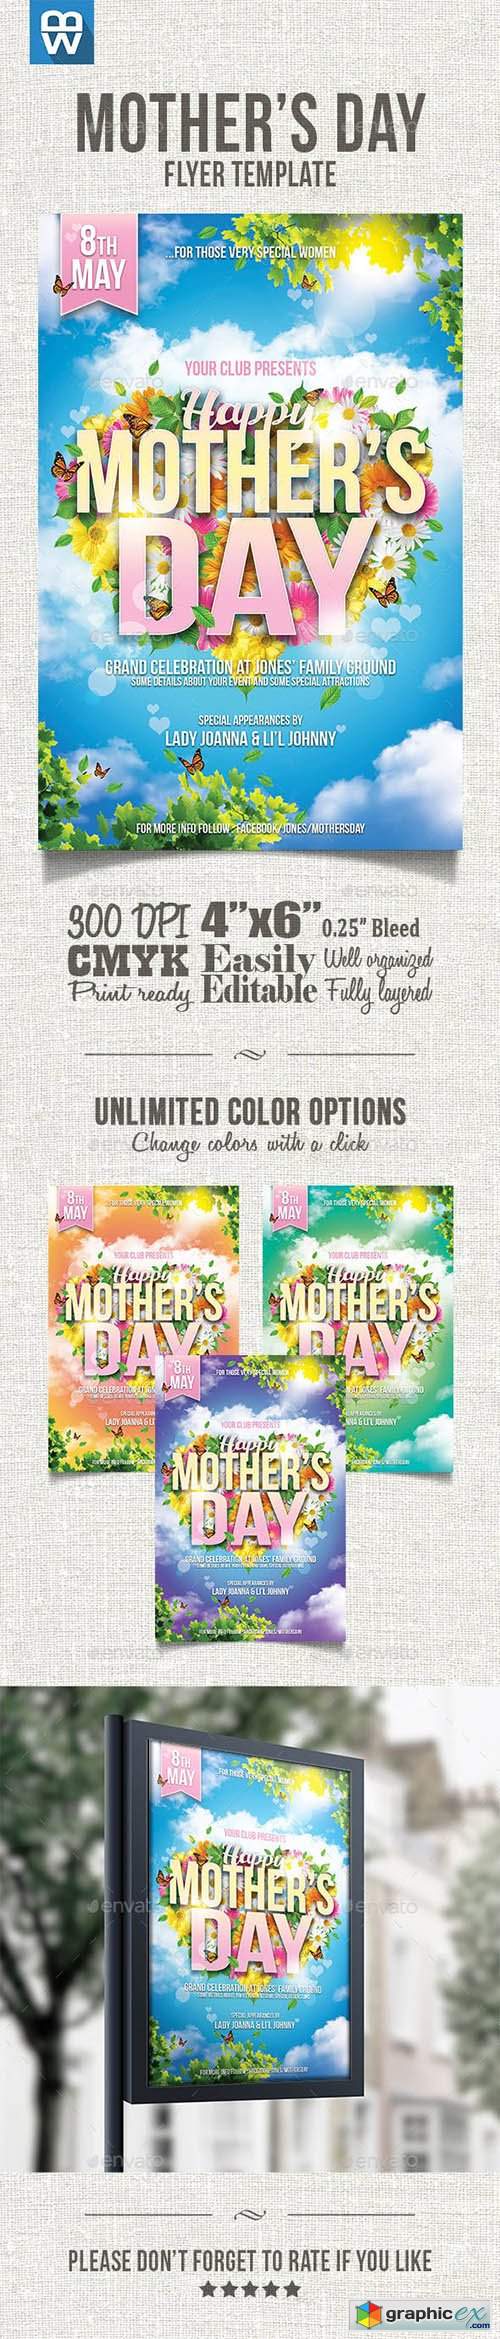 Mother's Day Flyer Template 15877342